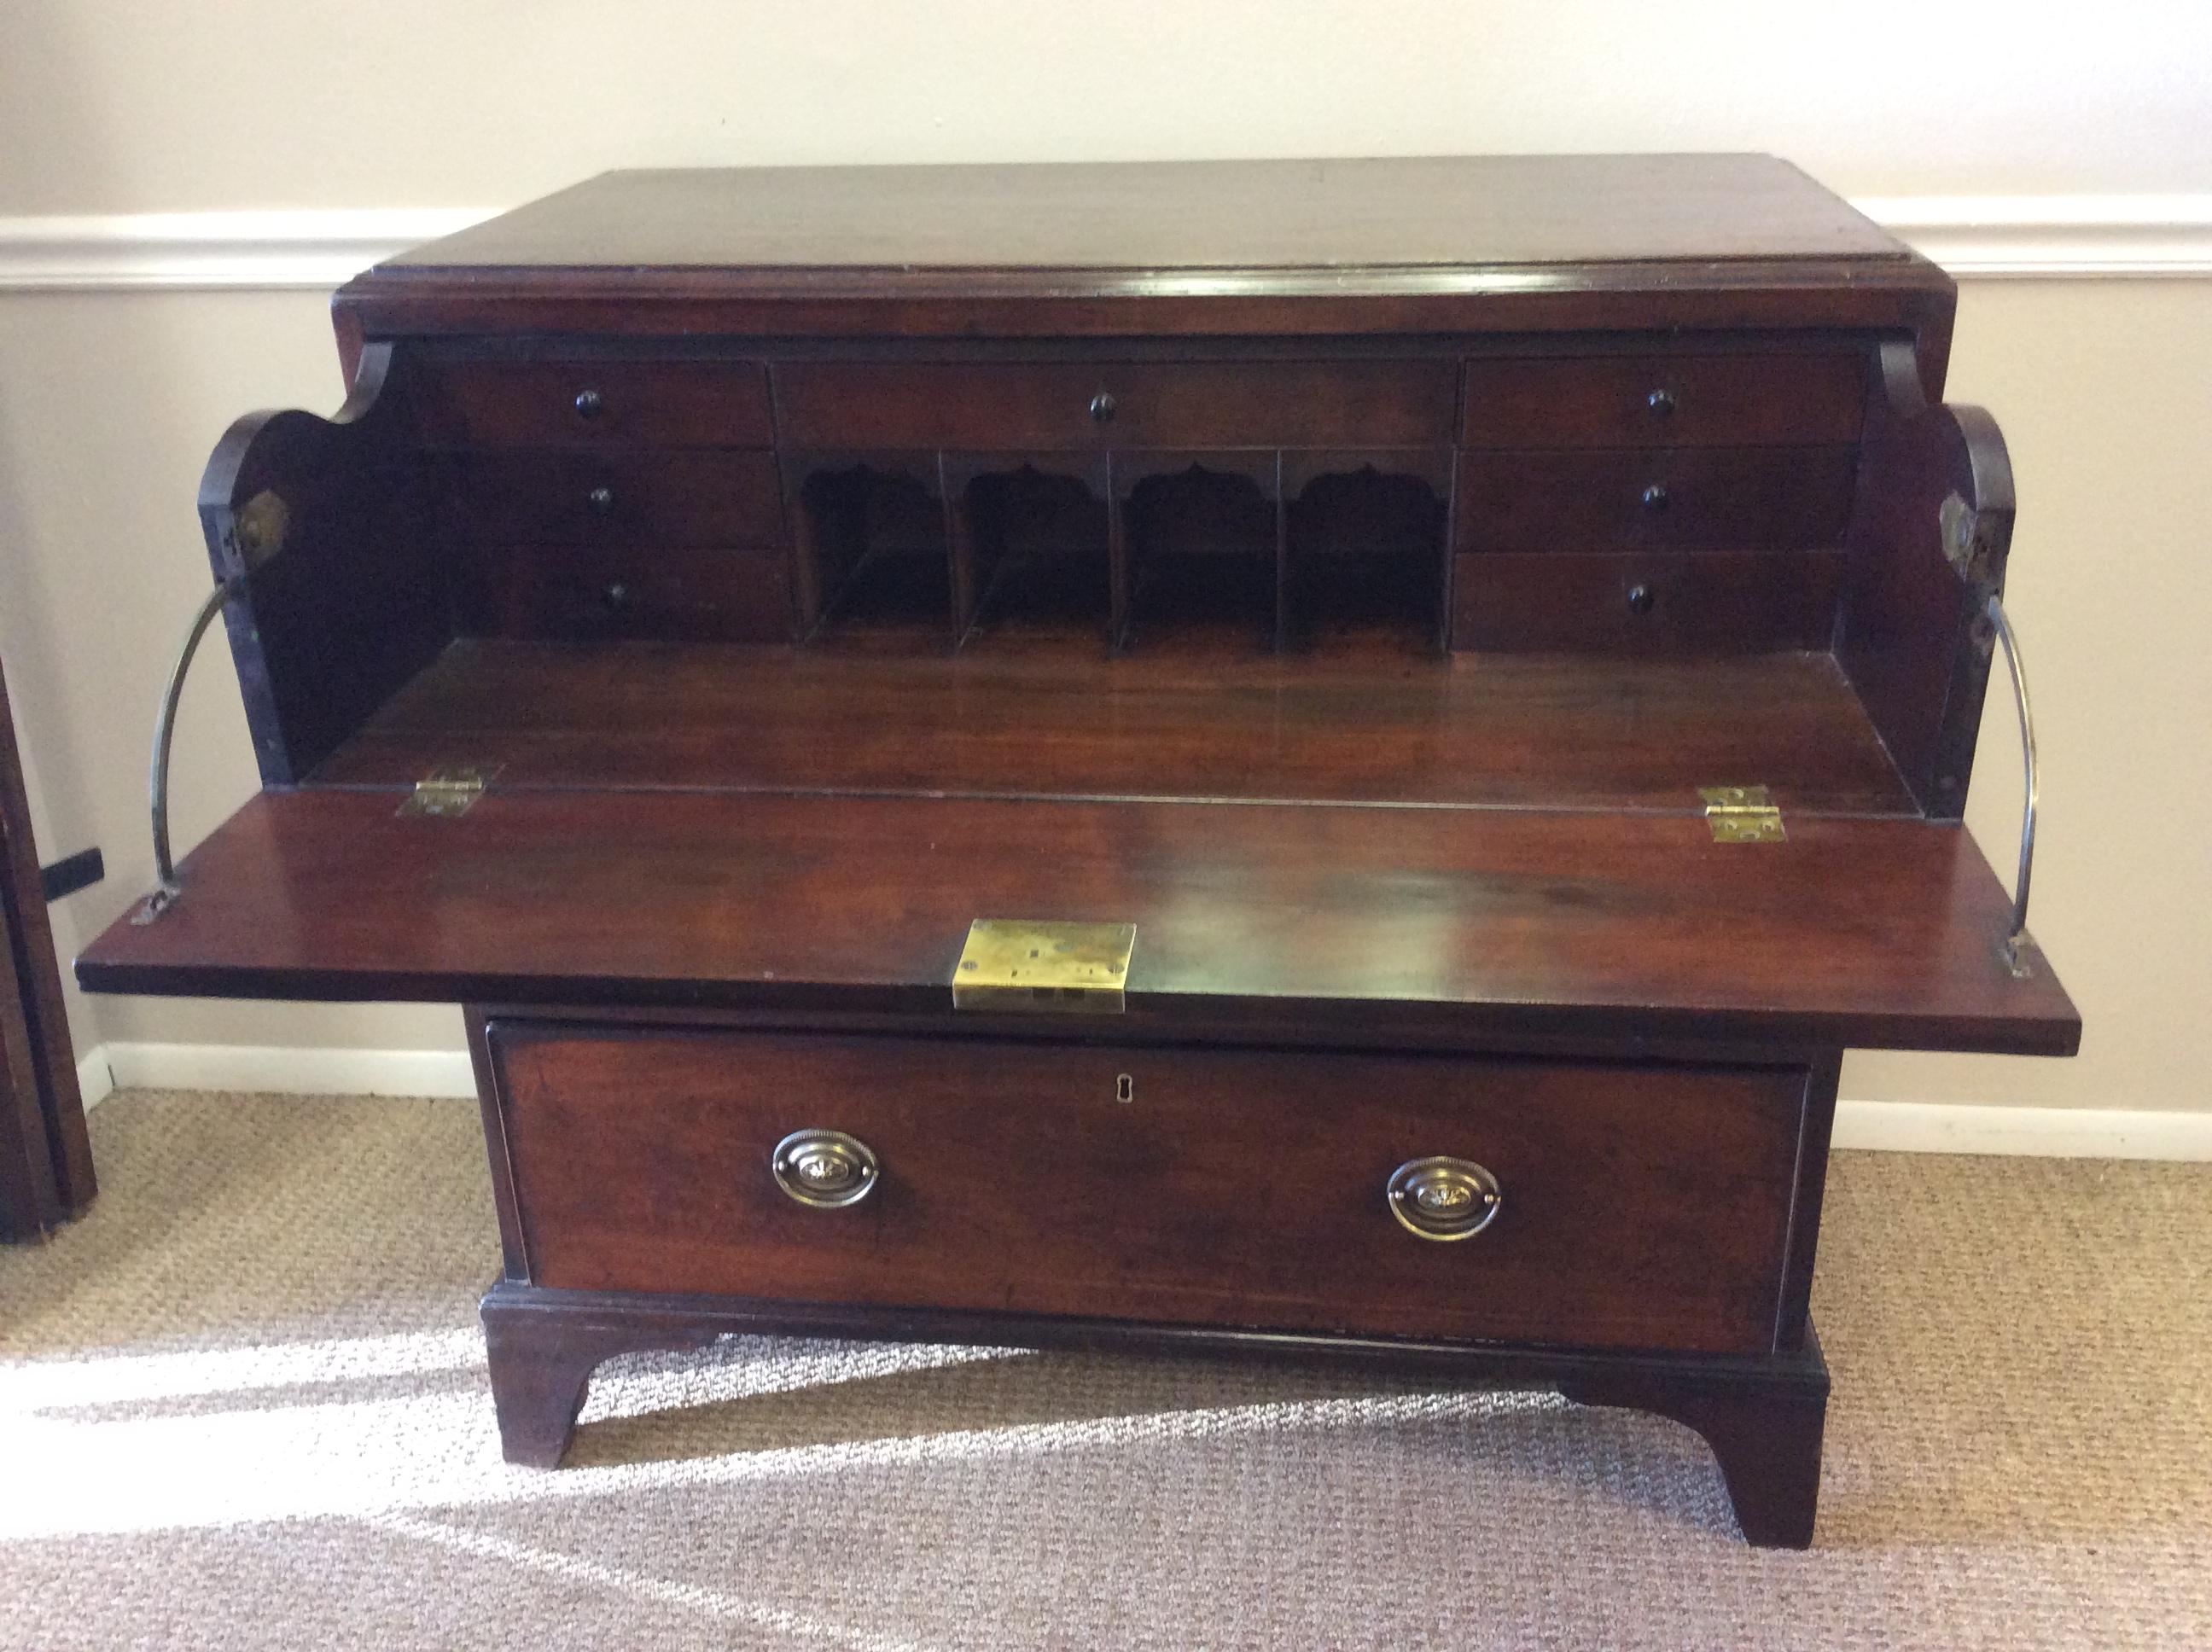 George III Mahogany Butlers Chest. Solid Mahogany molded top over three cock beaded drawers with the top drawer housing a nicely fitted desk interior. The original surface showing signs of age and use over the years and has a nice warm mellow color